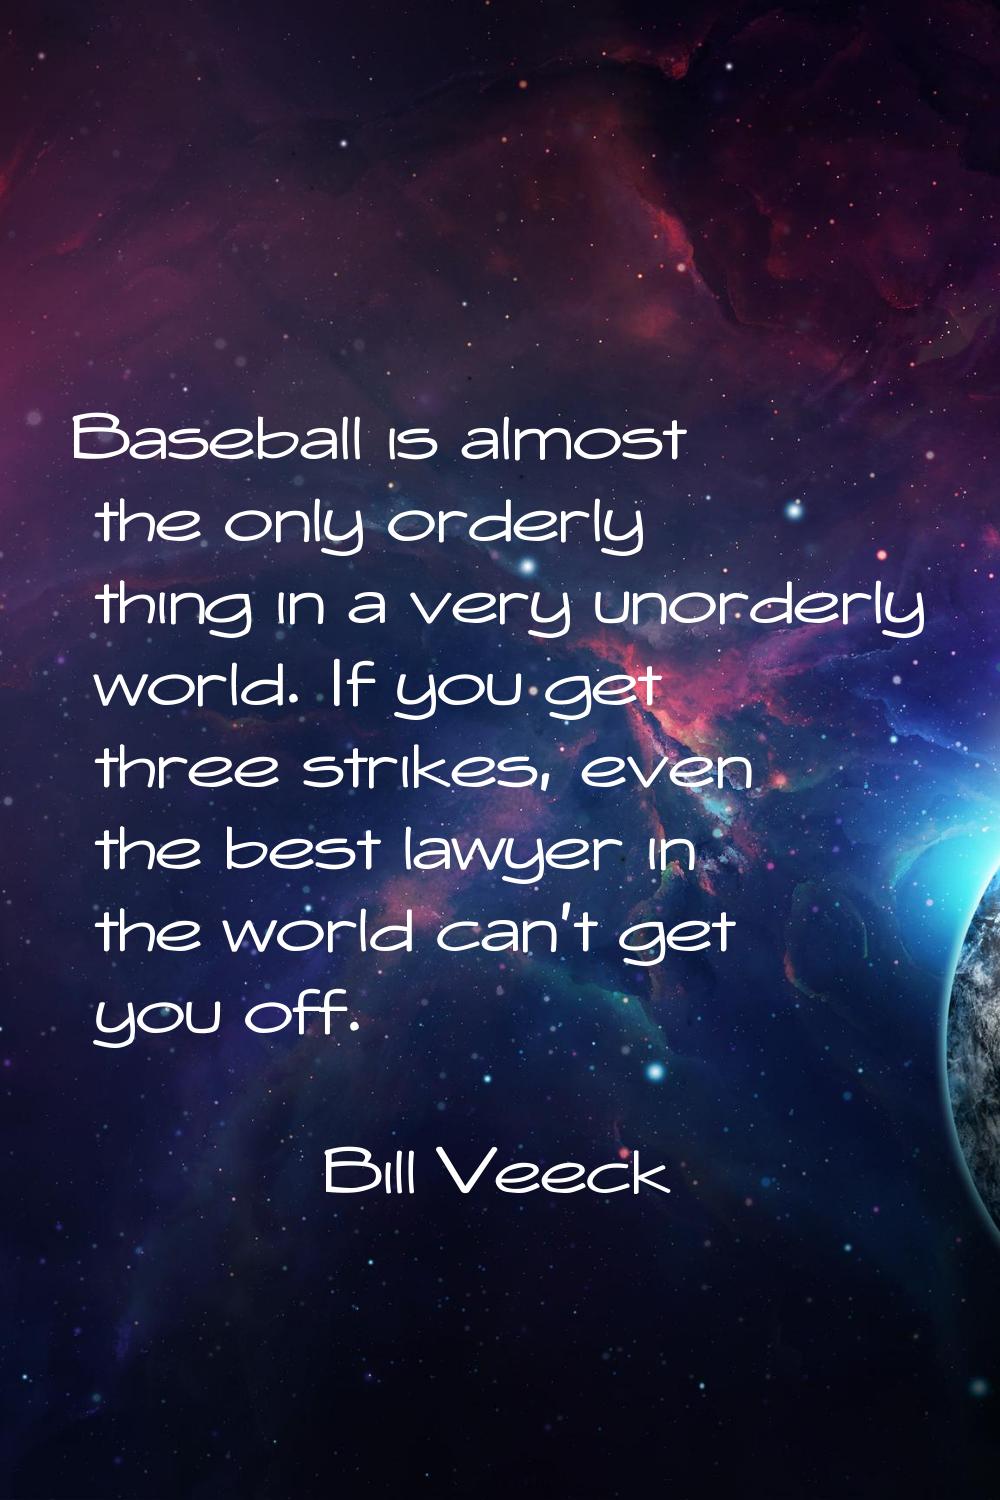 Baseball is almost the only orderly thing in a very unorderly world. If you get three strikes, even